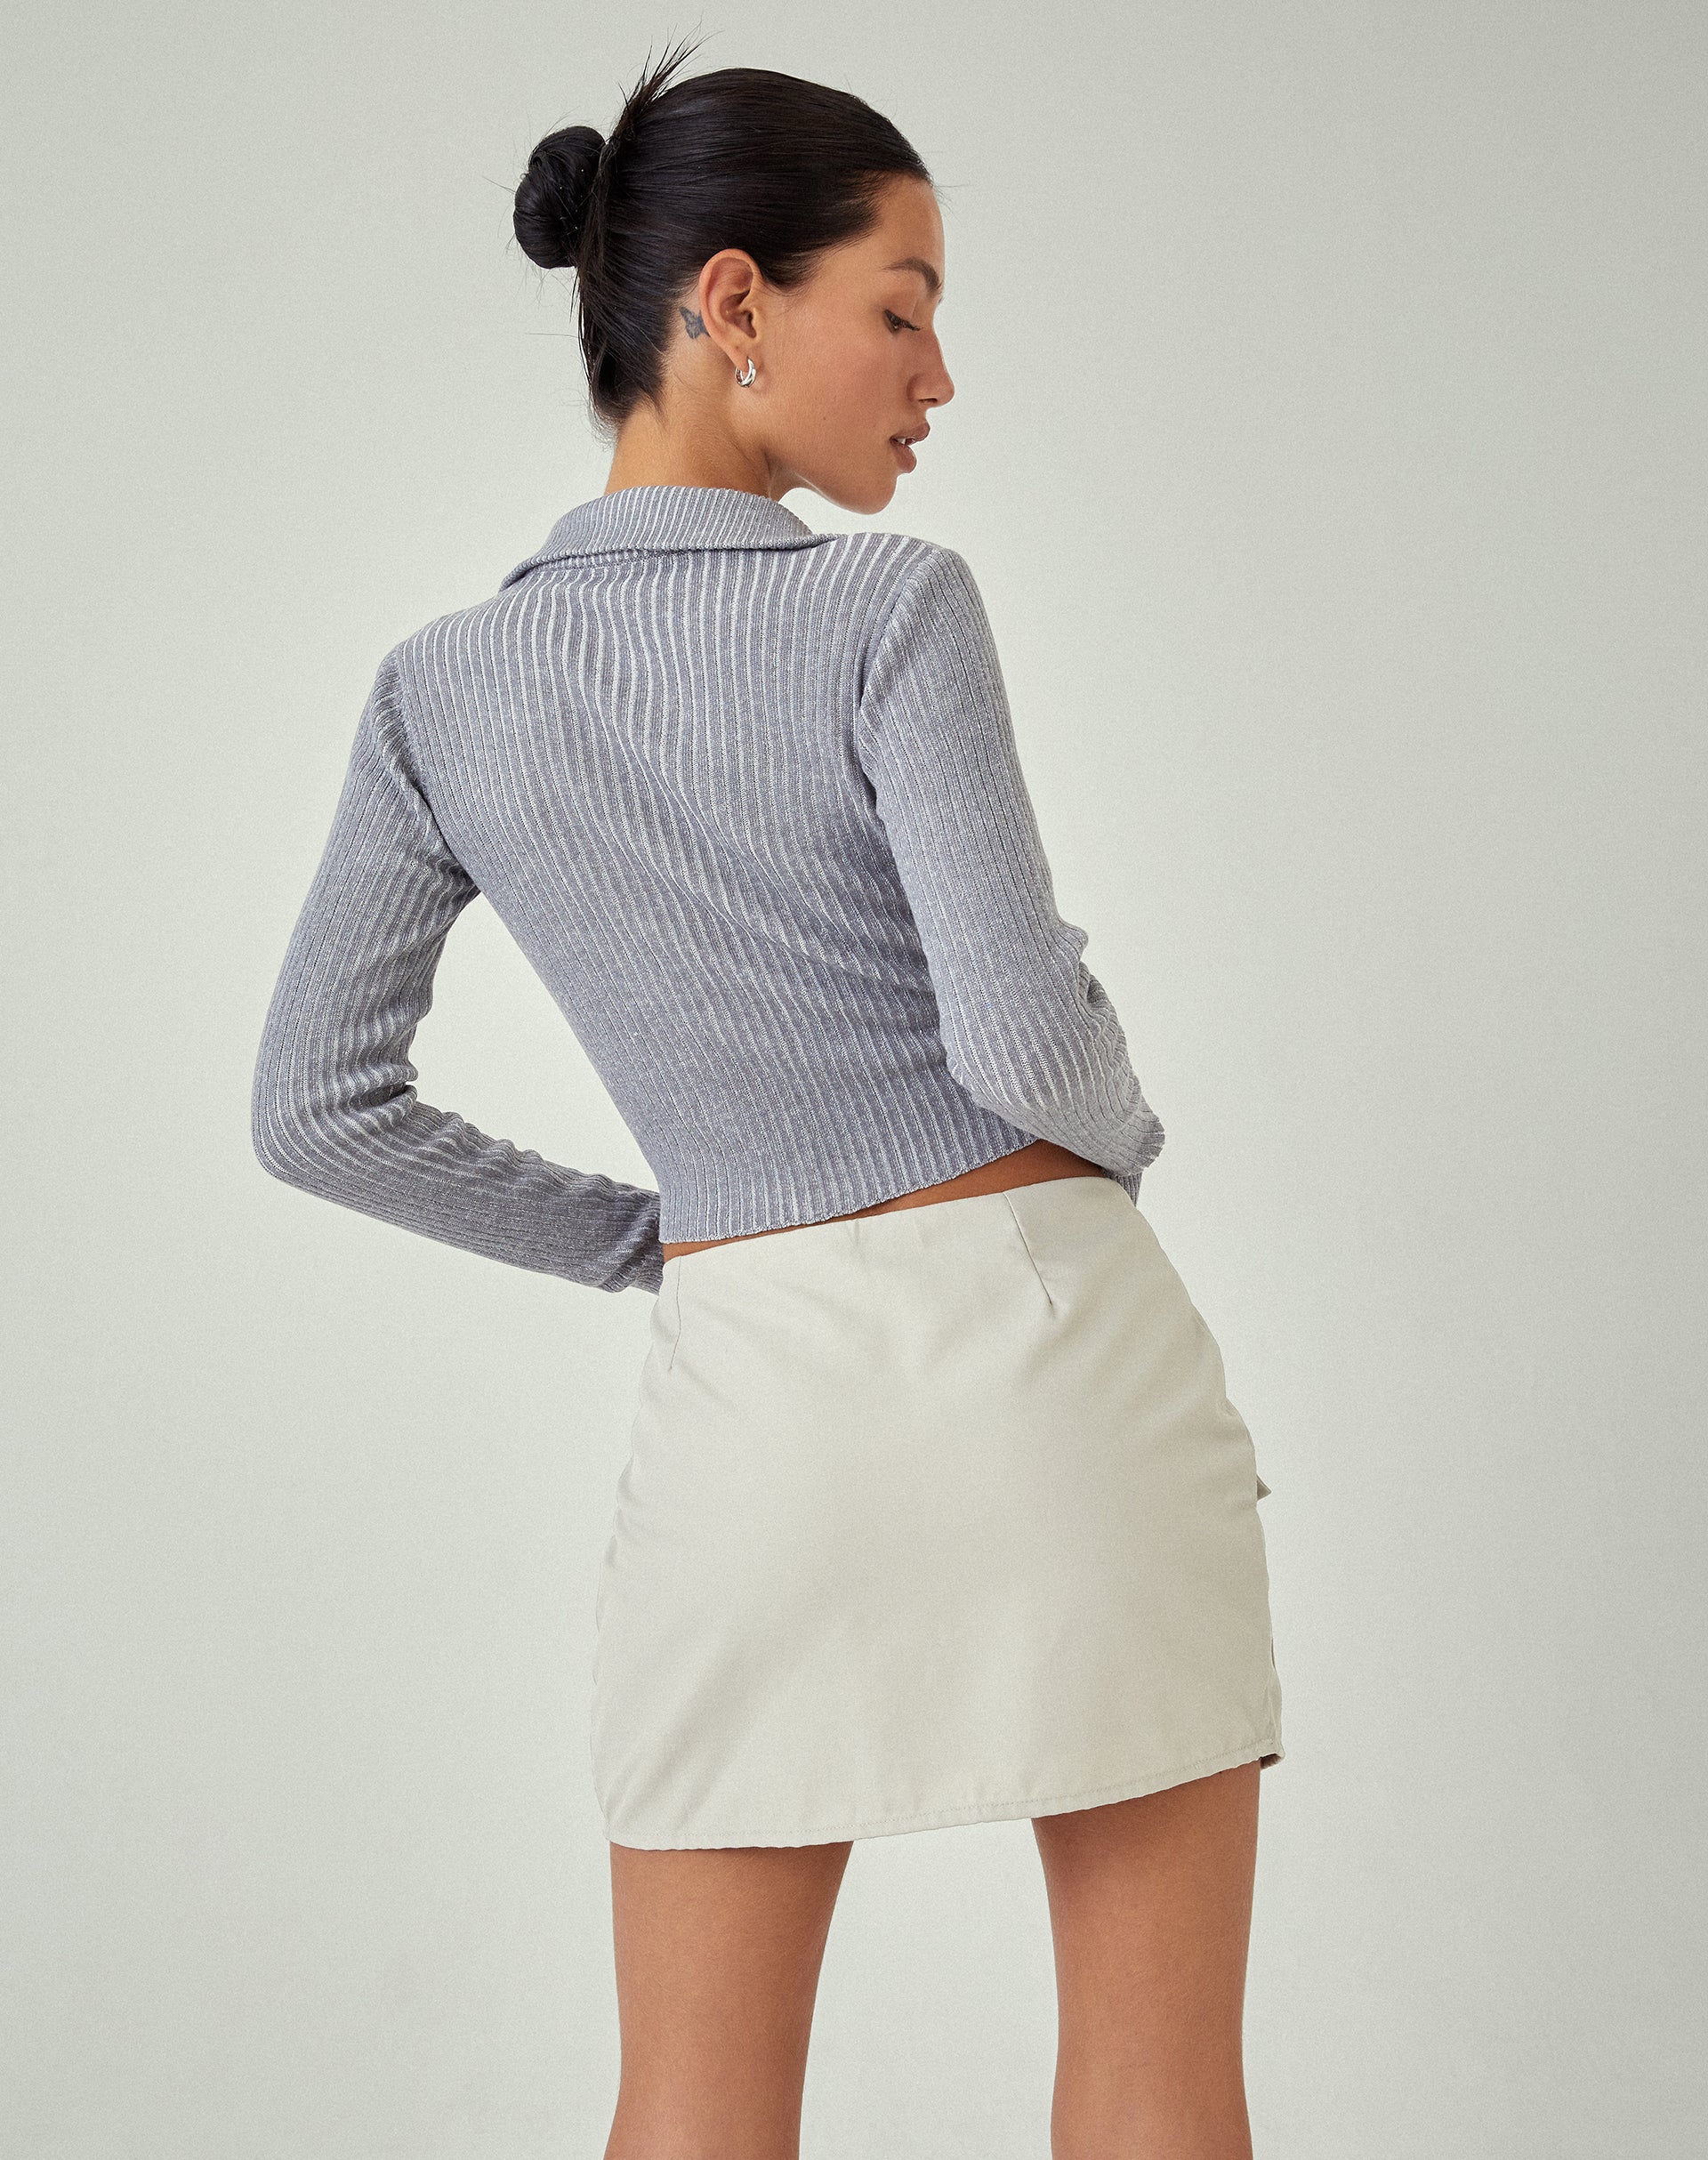 image of MOTEL X JACQUIE Tuzifa Cropped Jumper in Grey